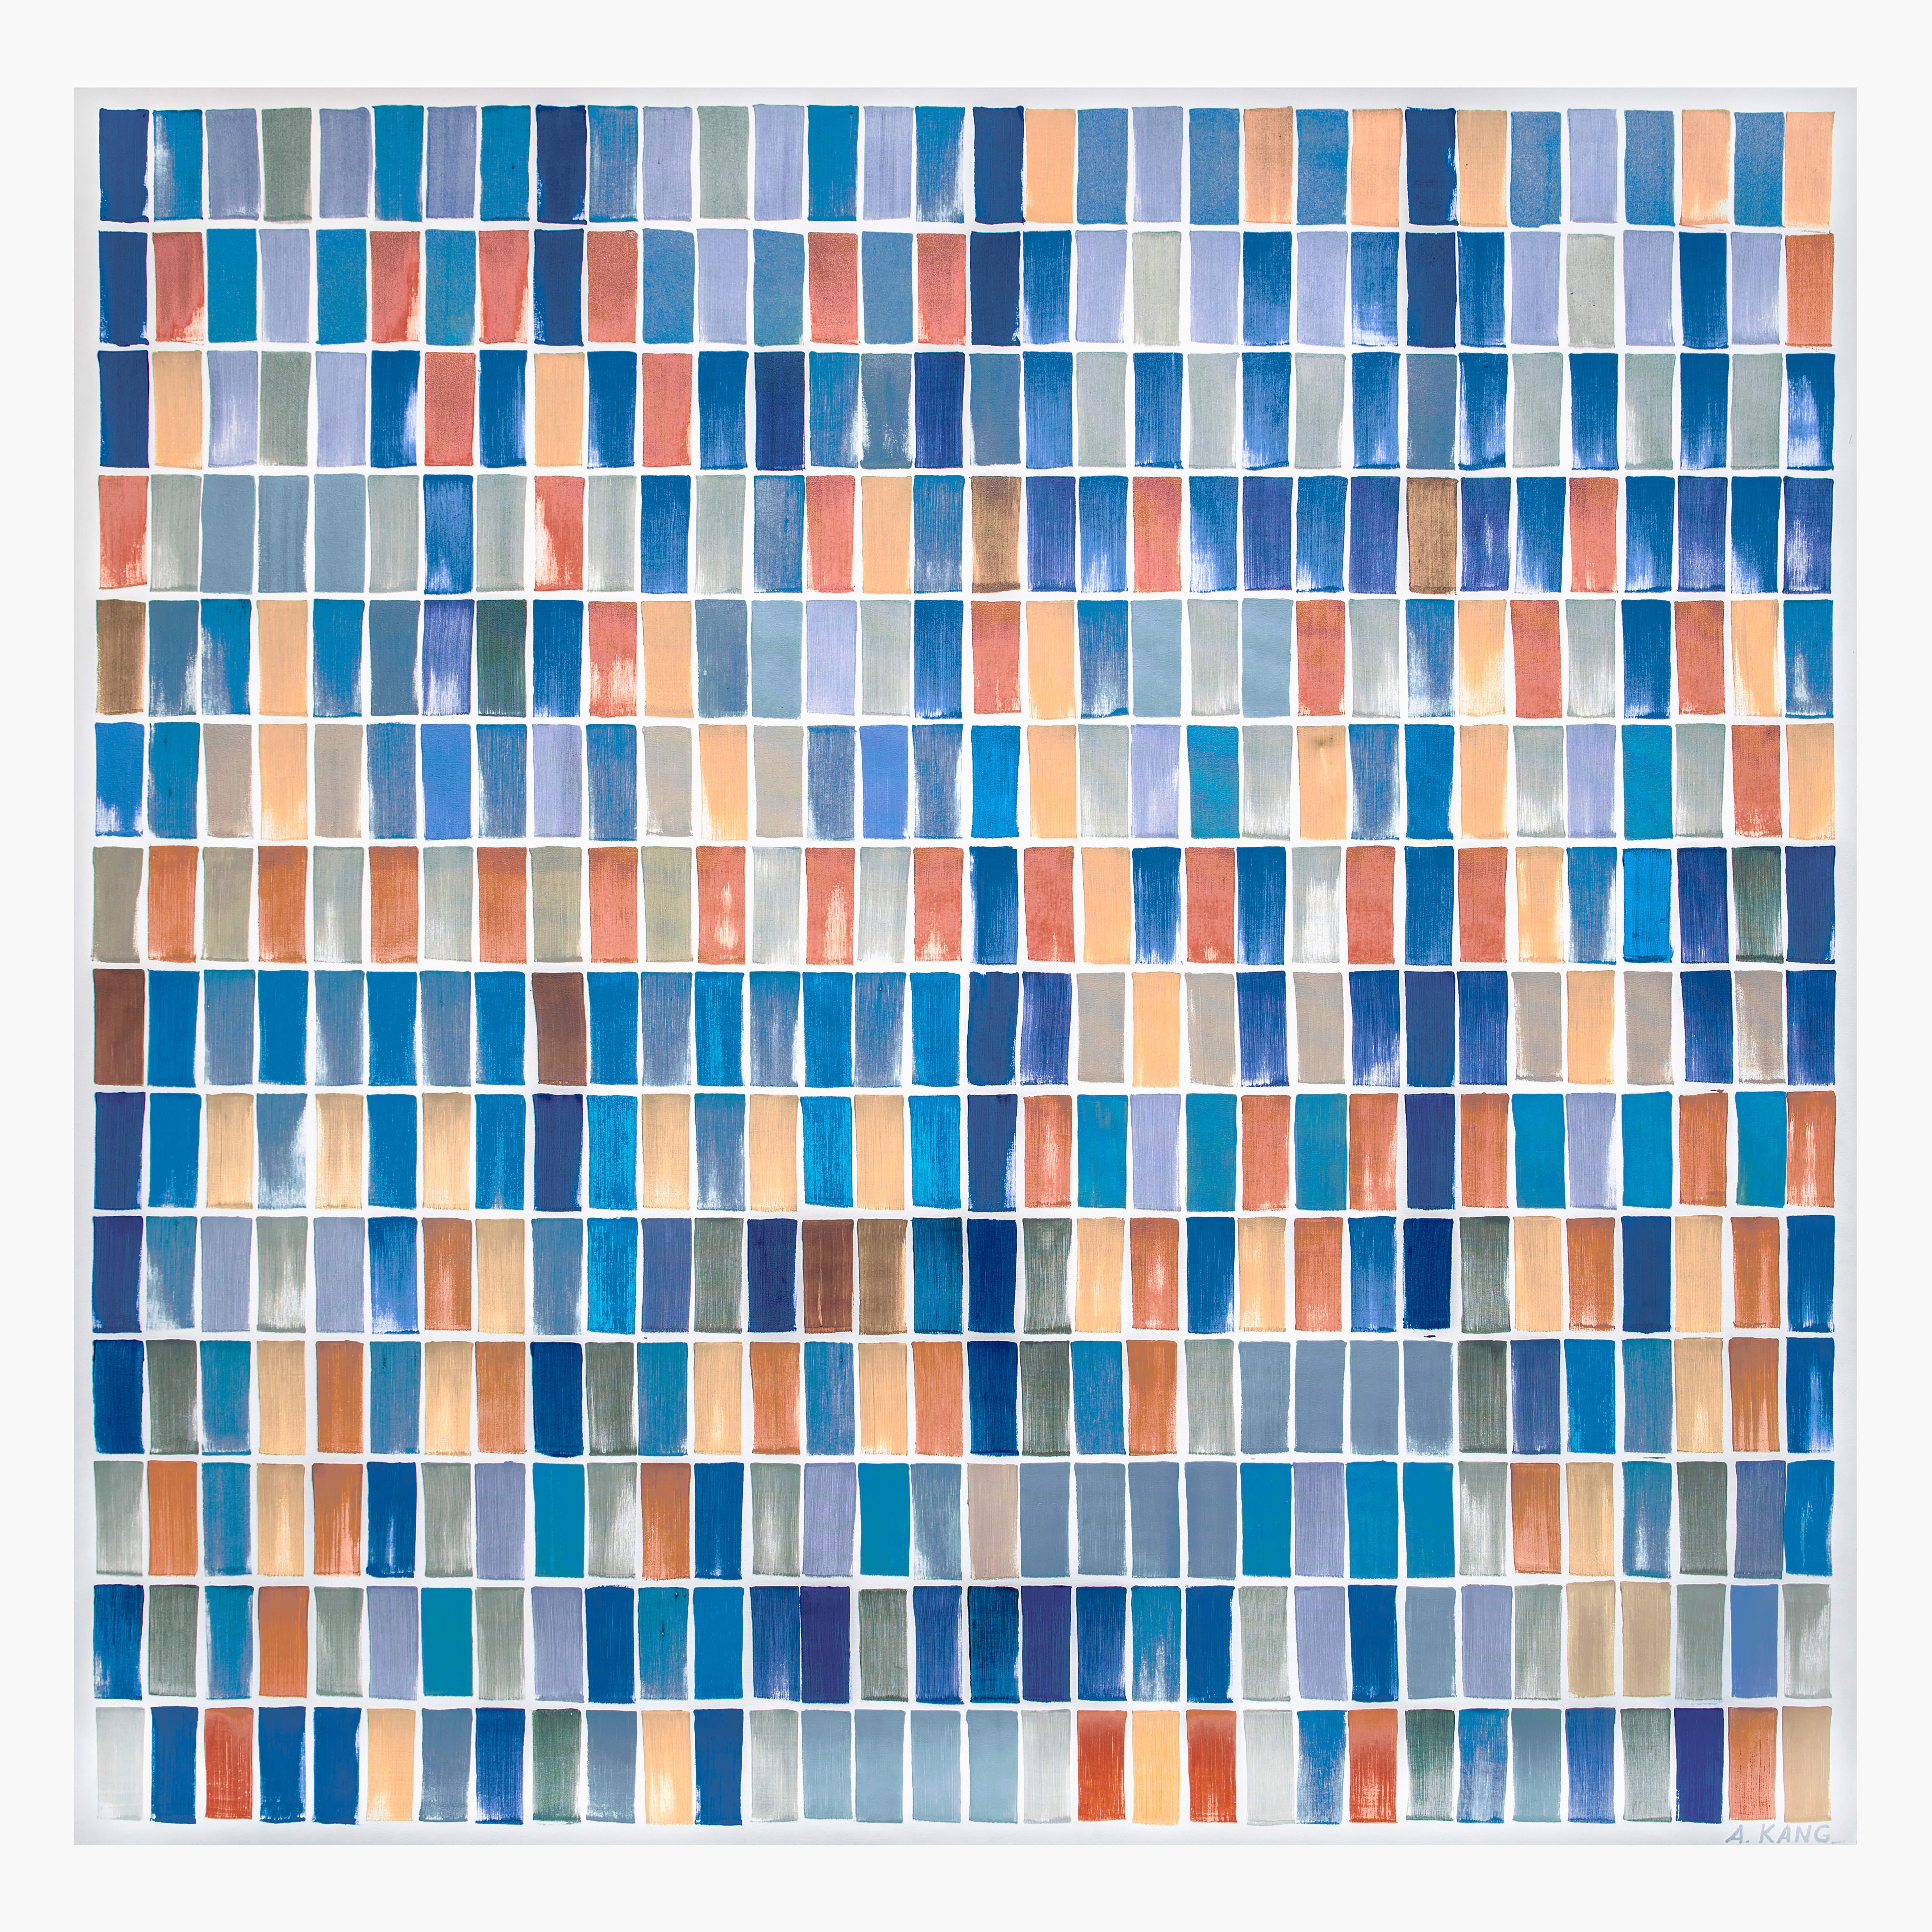 Bach Prelude 1-Cool tone pattern print edition on paper in square format